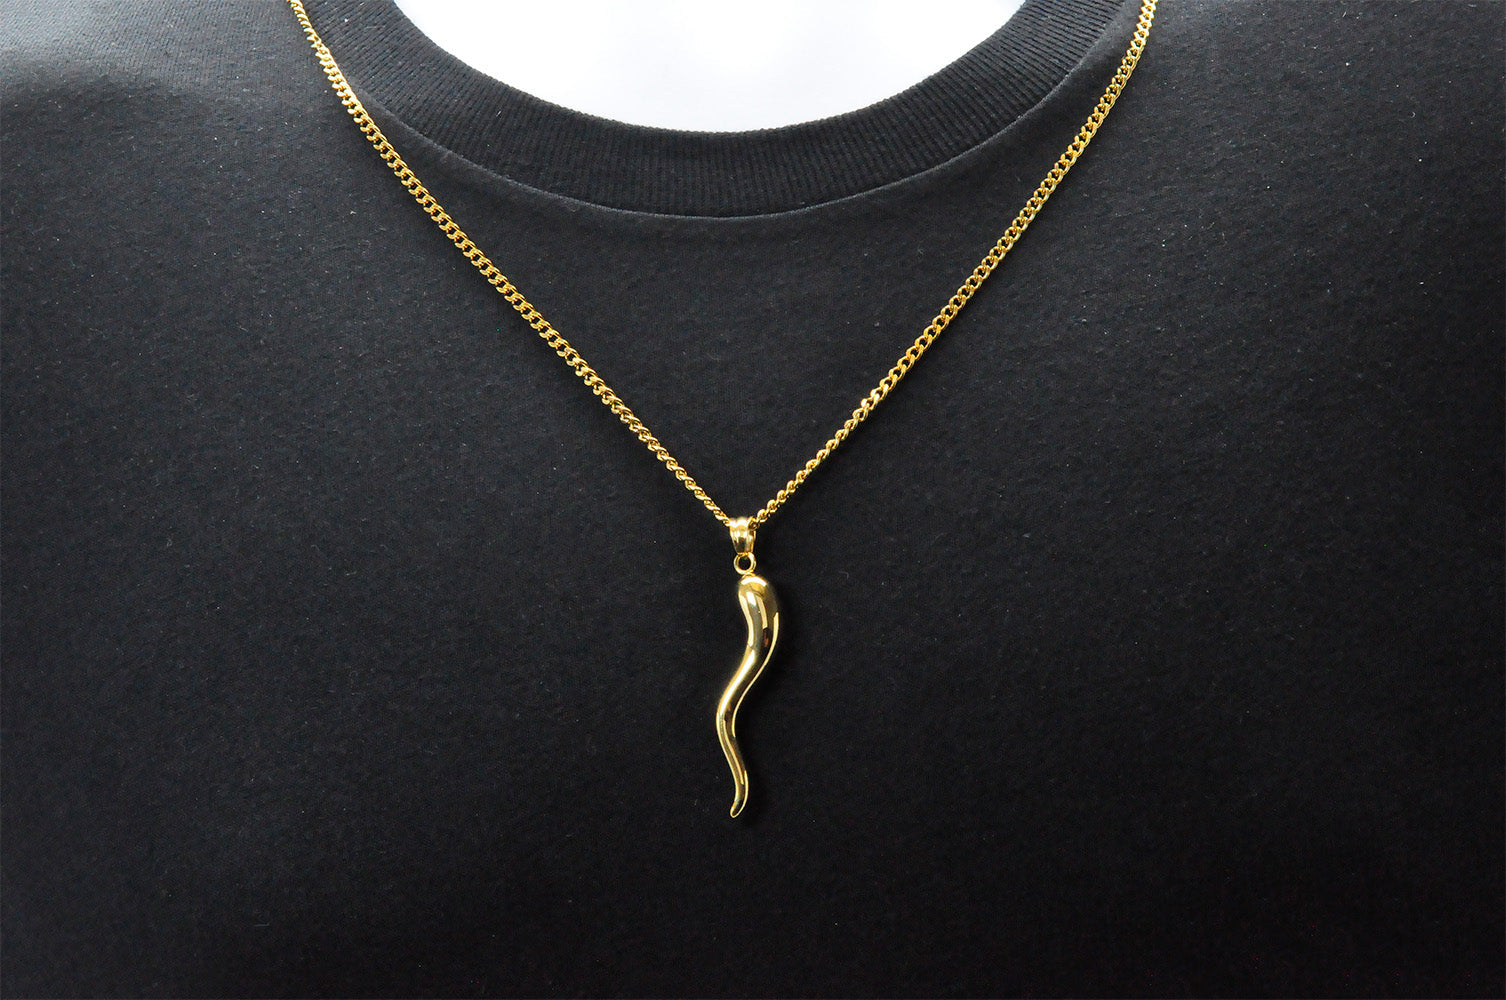 18 Kt Hallmark Real Solid Yellow Gold Italian Luck Horn Chain Necklace  Pendant | eBay